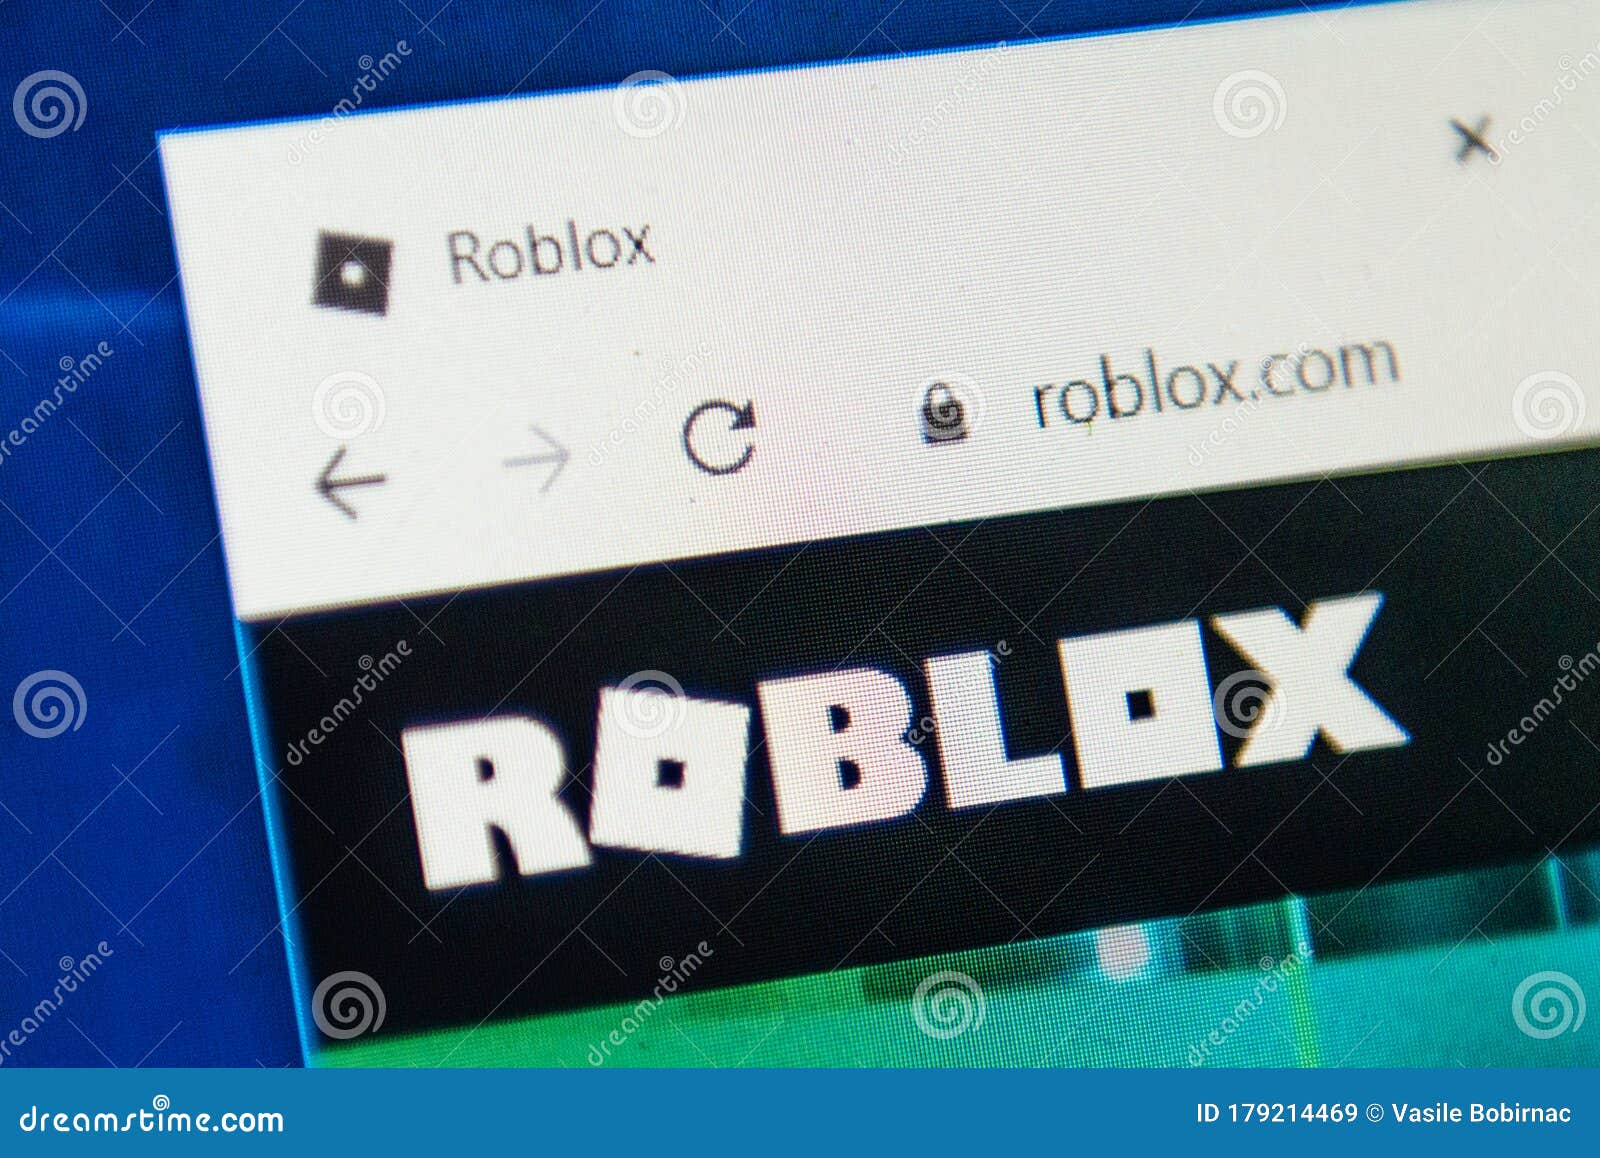 54 Roblox Photos Free Royalty Free Stock Photos From Dreamstime - roblox bilder